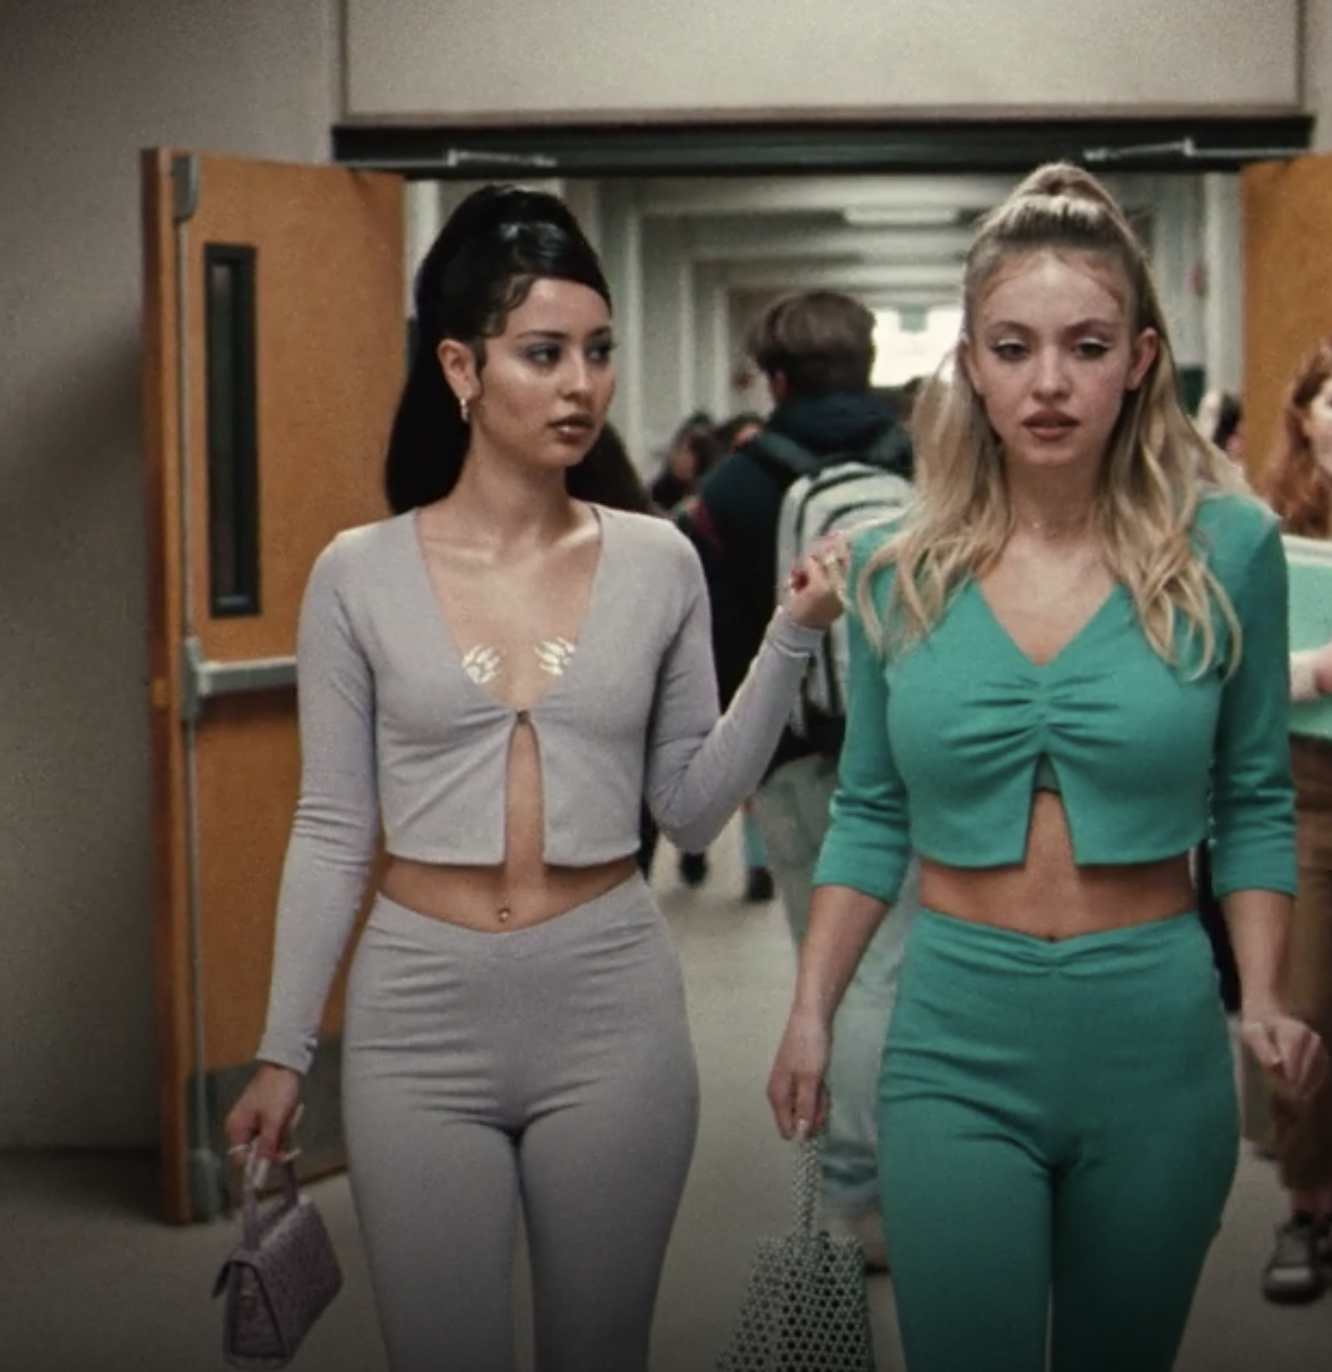 Maddy and Cassie walking down the hallway of their school wearing similar knit long-sleeved crop tops and pants